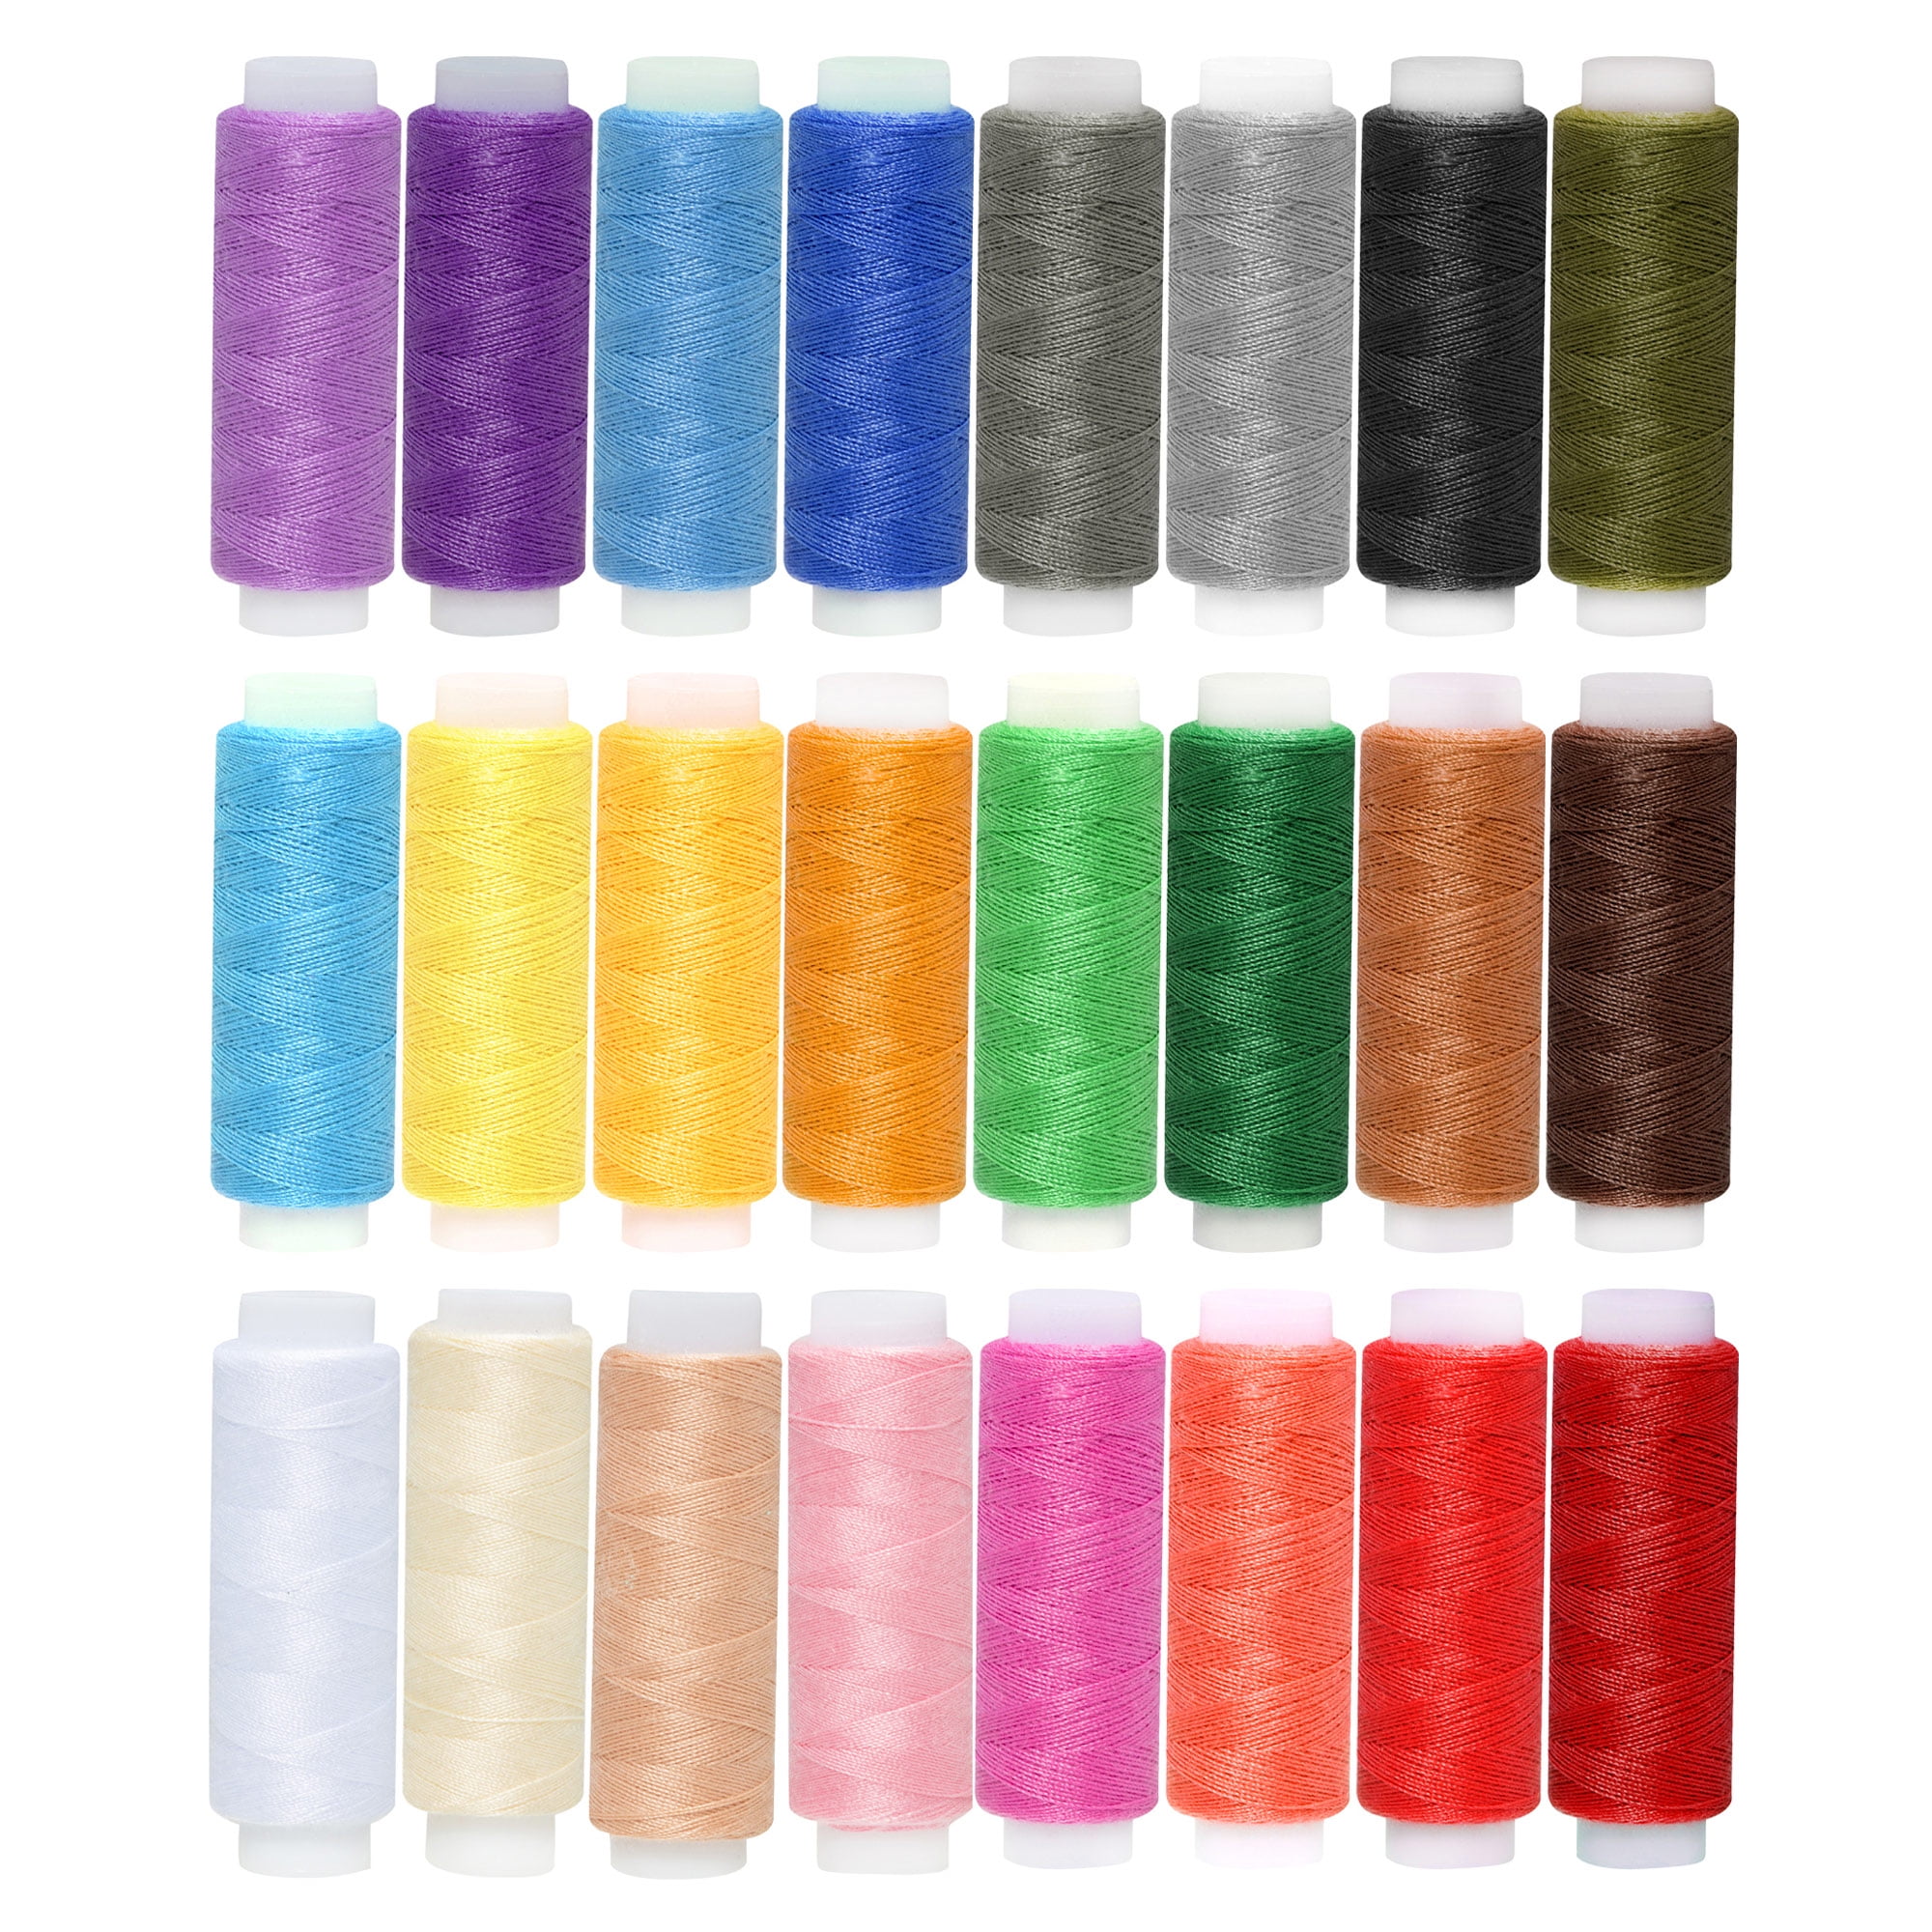 30 Spools Mixed Colors 100% Polyester Sewing Quilting Threads Set All Purpose 